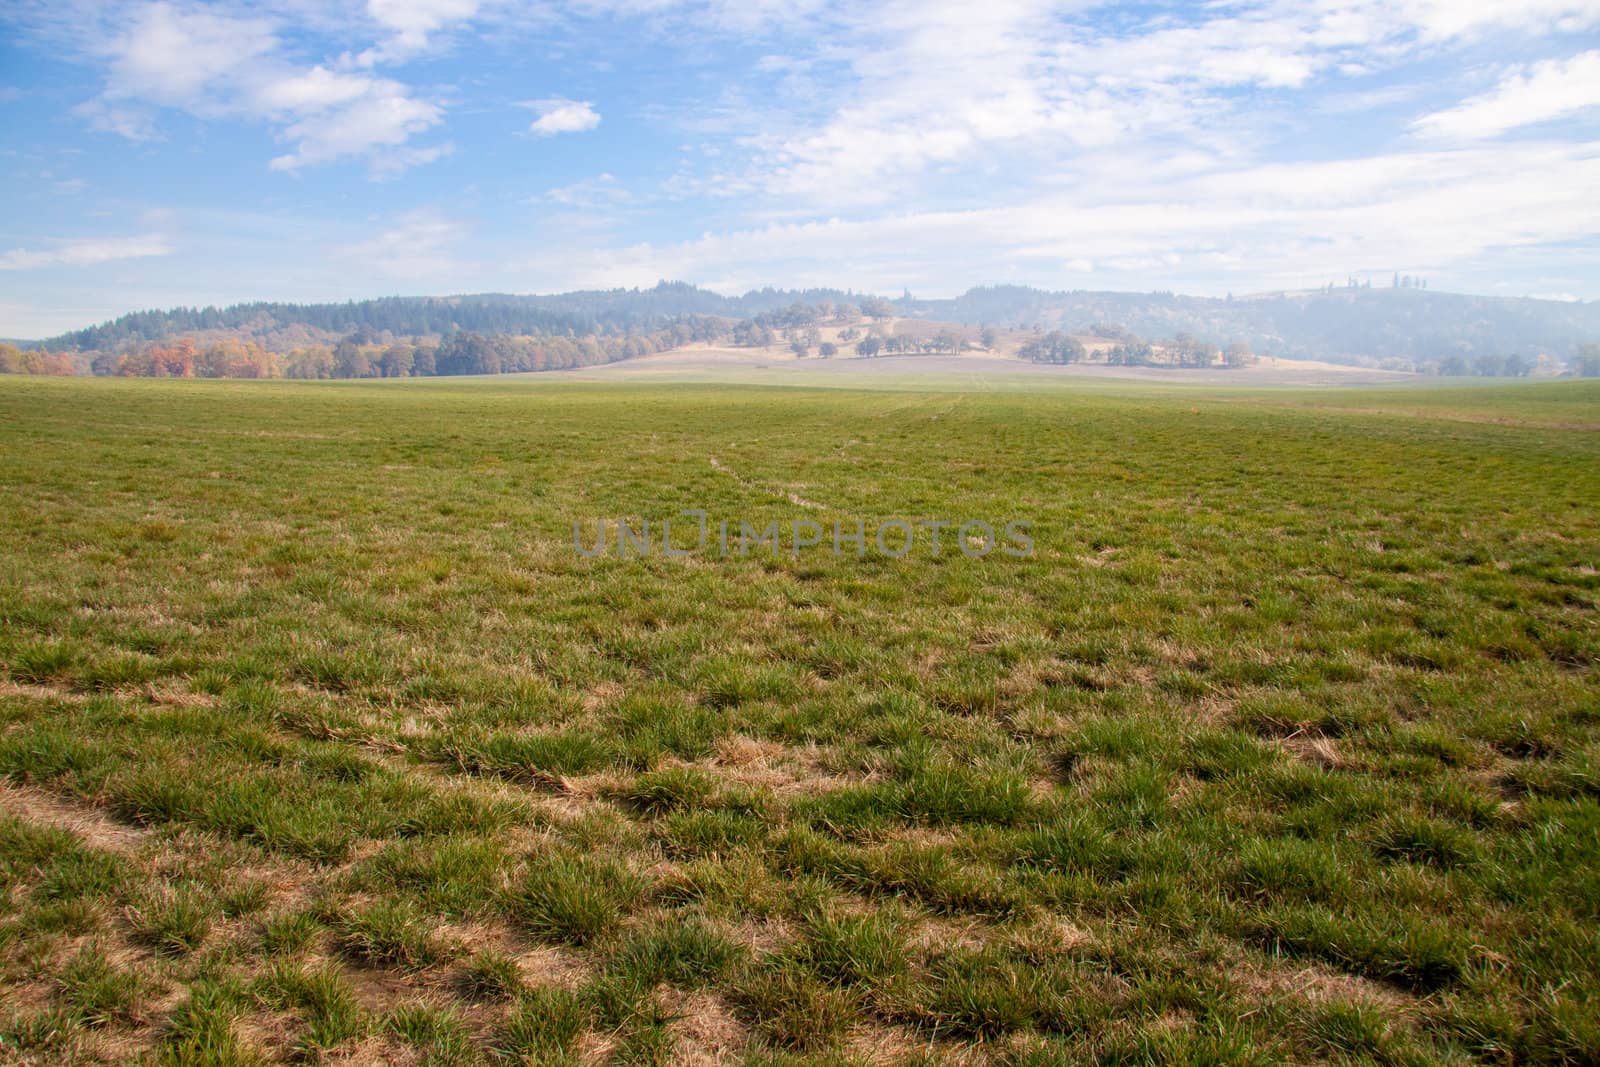 Grass and sky come together along the horizon in this landscape shot of a very large field.